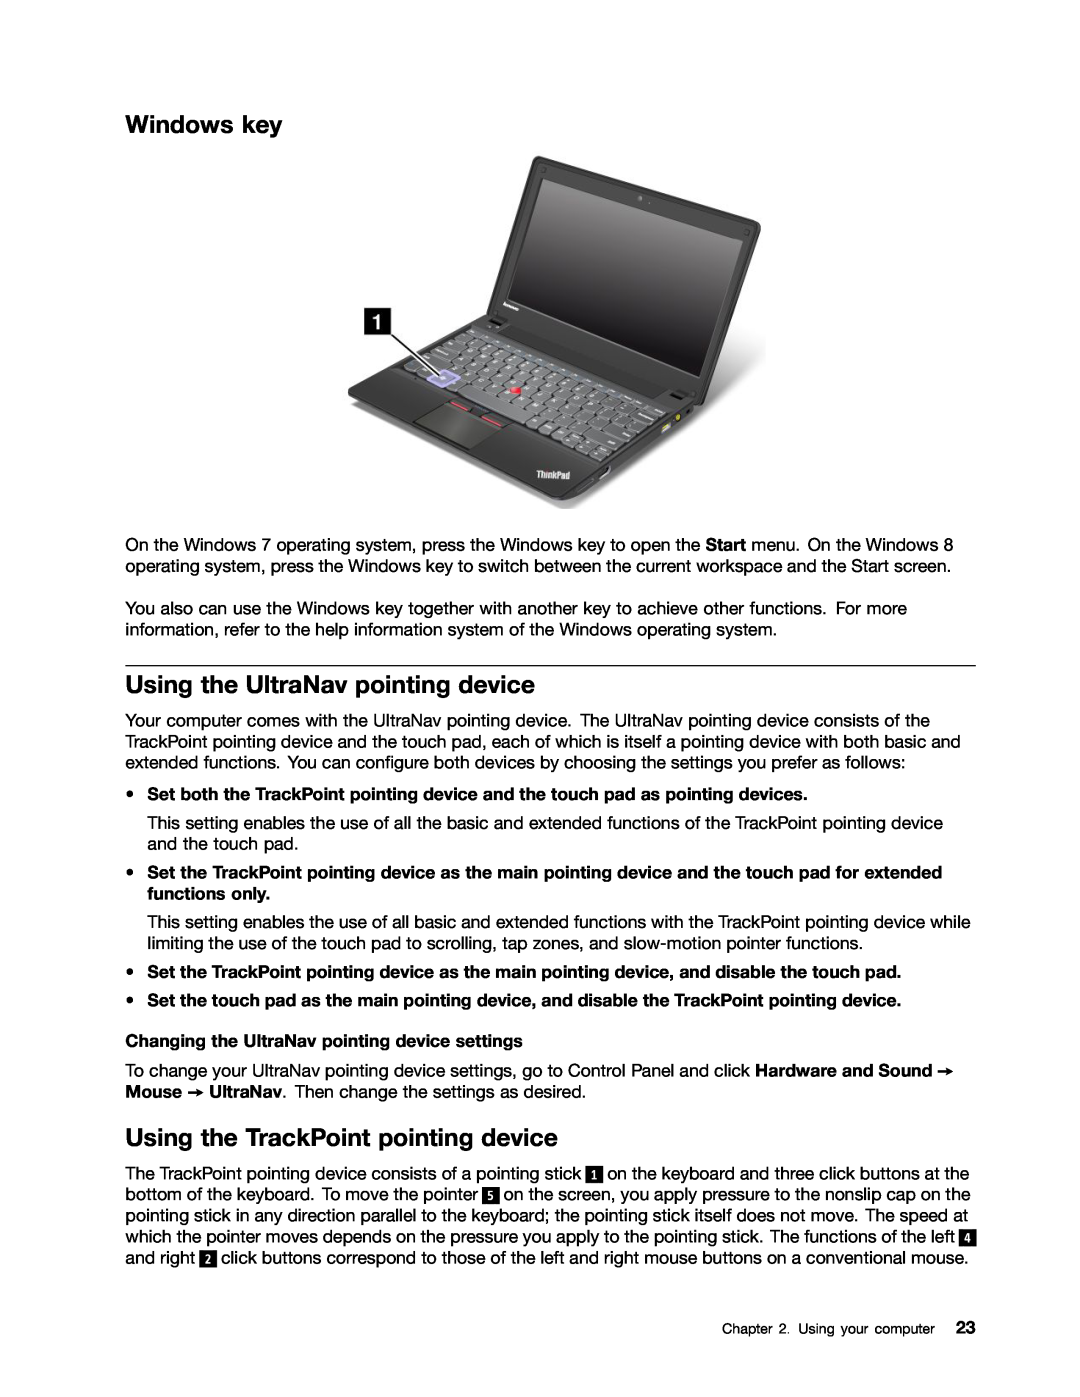 Lenovo X131E manual Windows key, Using the UltraNav pointing device, Using the TrackPoint pointing device 